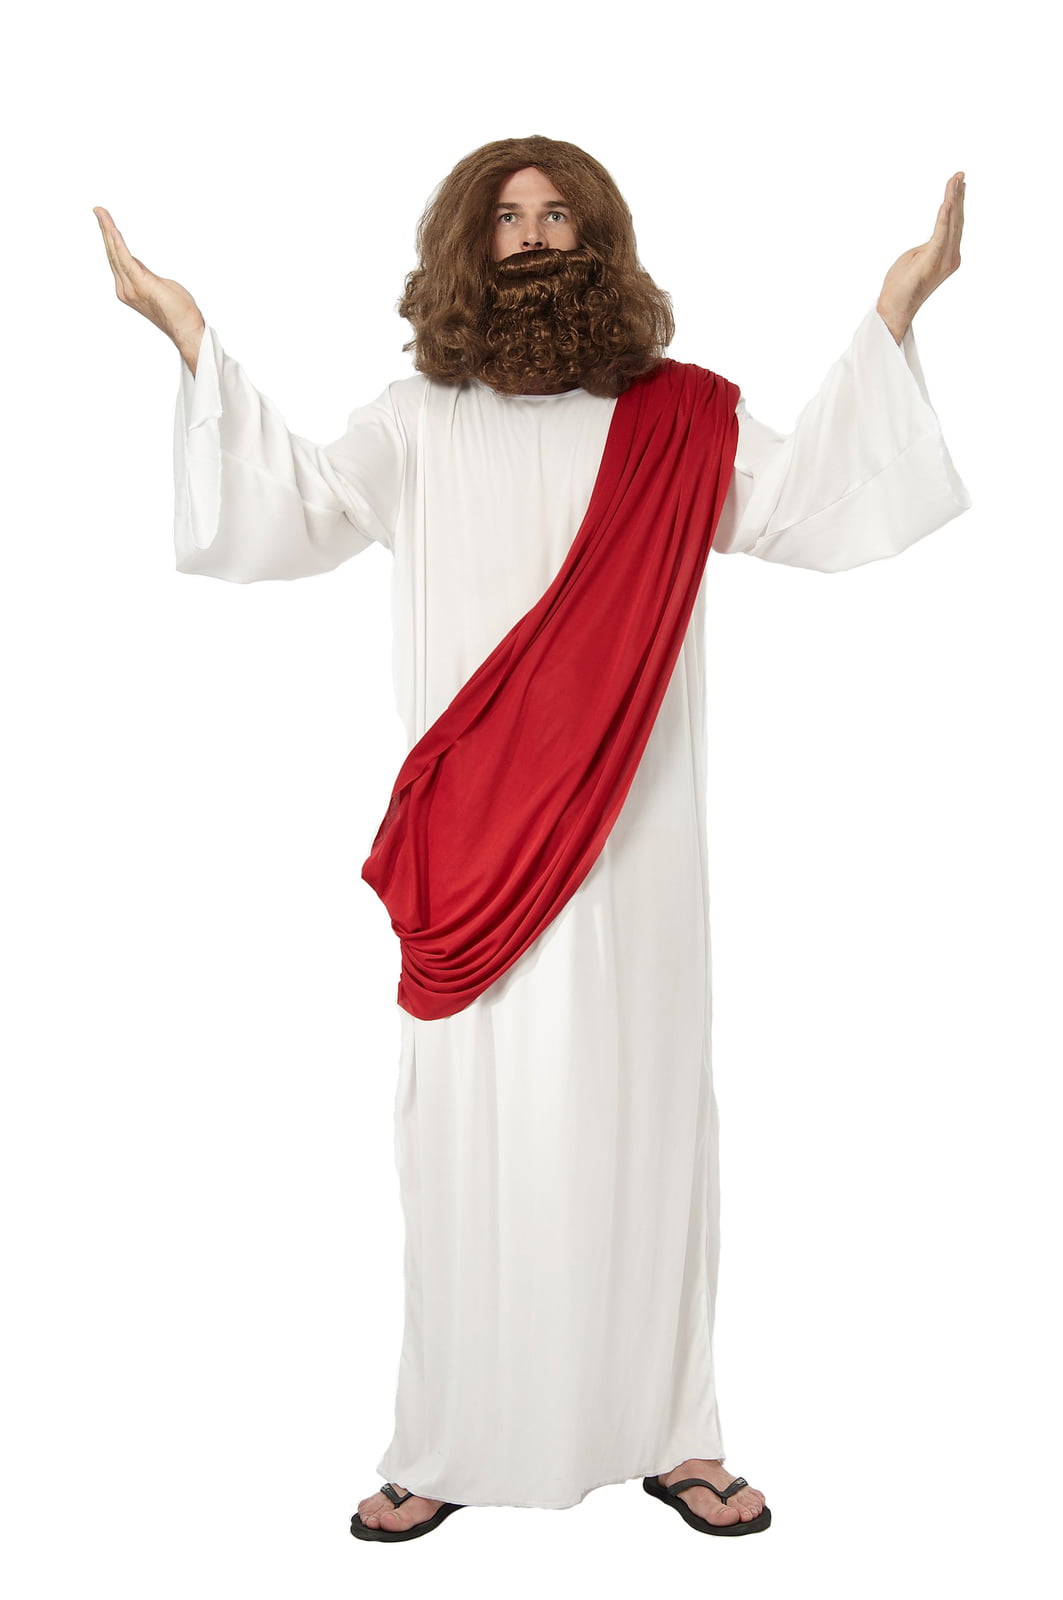 Featured image for “Jesus Robe, Adult”